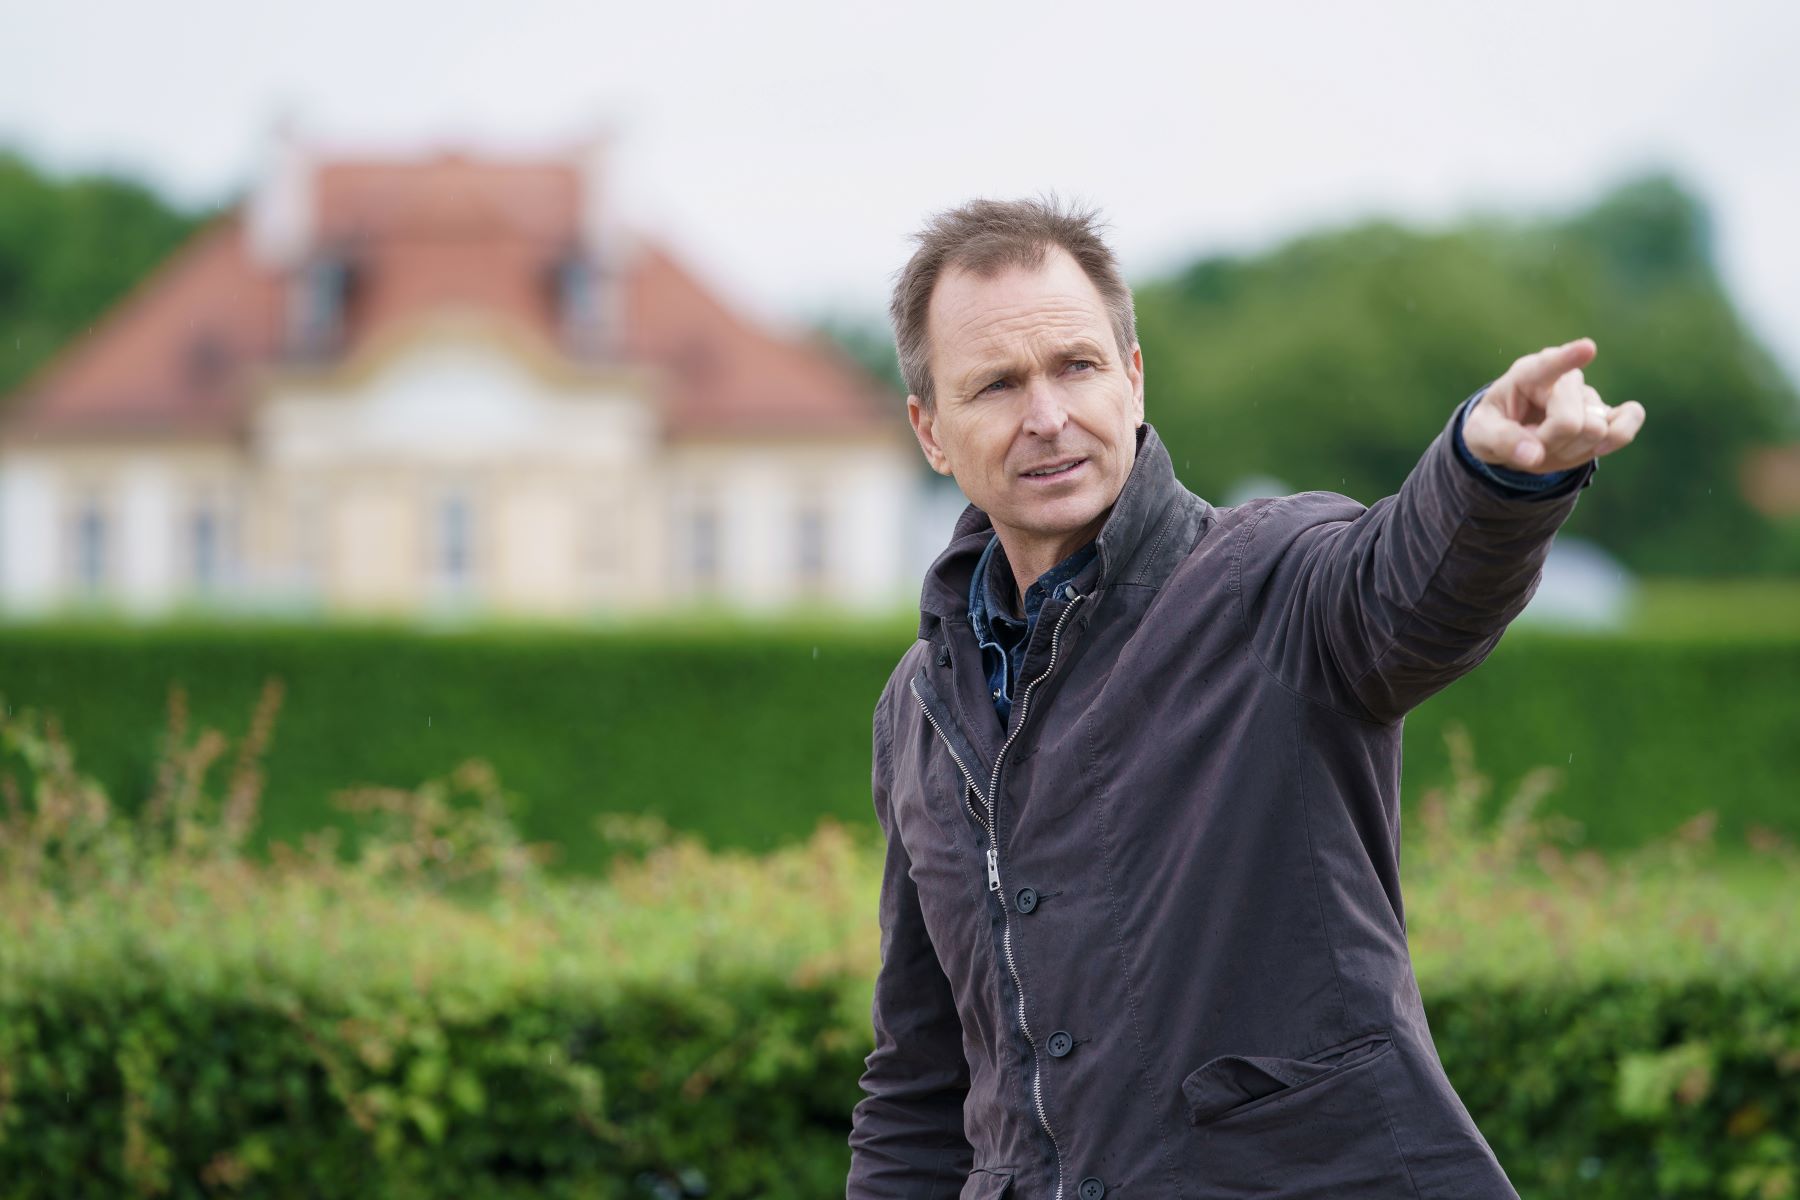 Phil Keoghan, who hosts 'The Amazing Race' on CBS, wears a dark gray jacket.